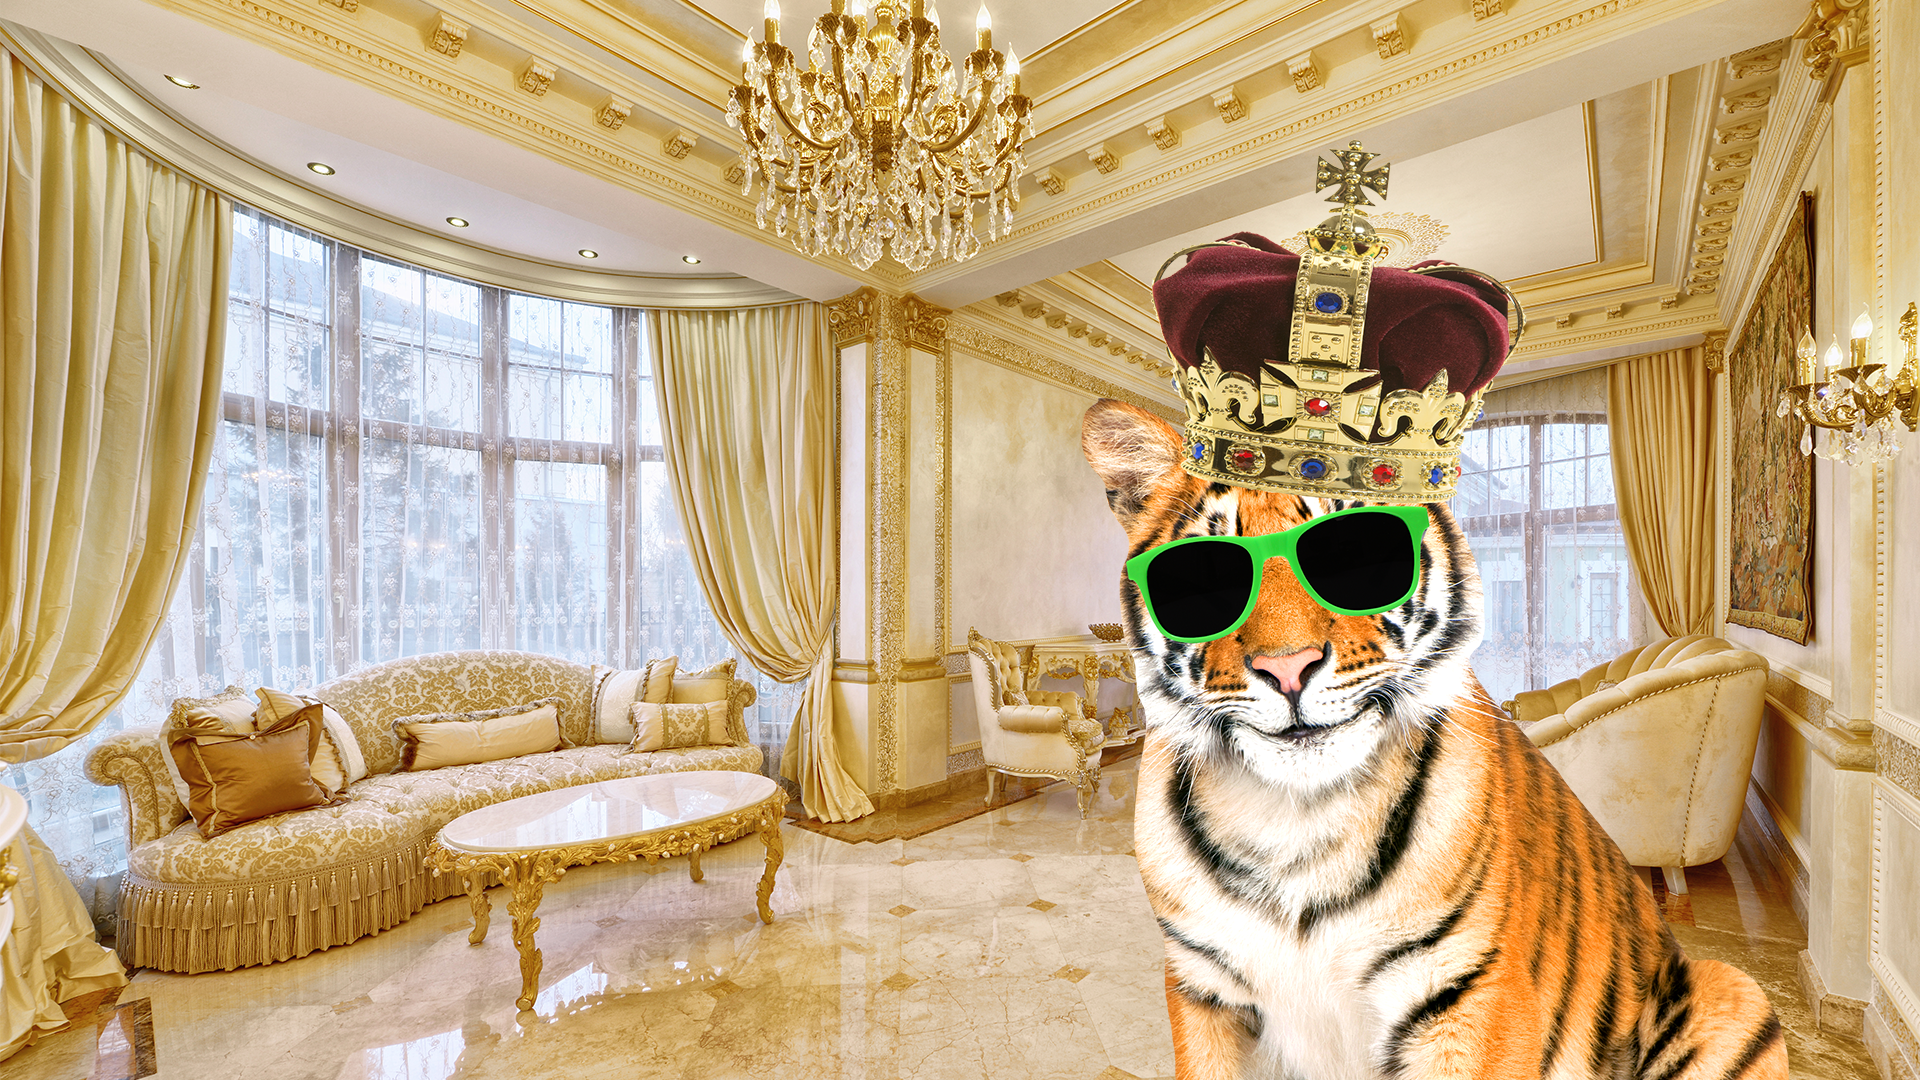 A tiger wearing a crown and sunglasses relaxes in a fancy room